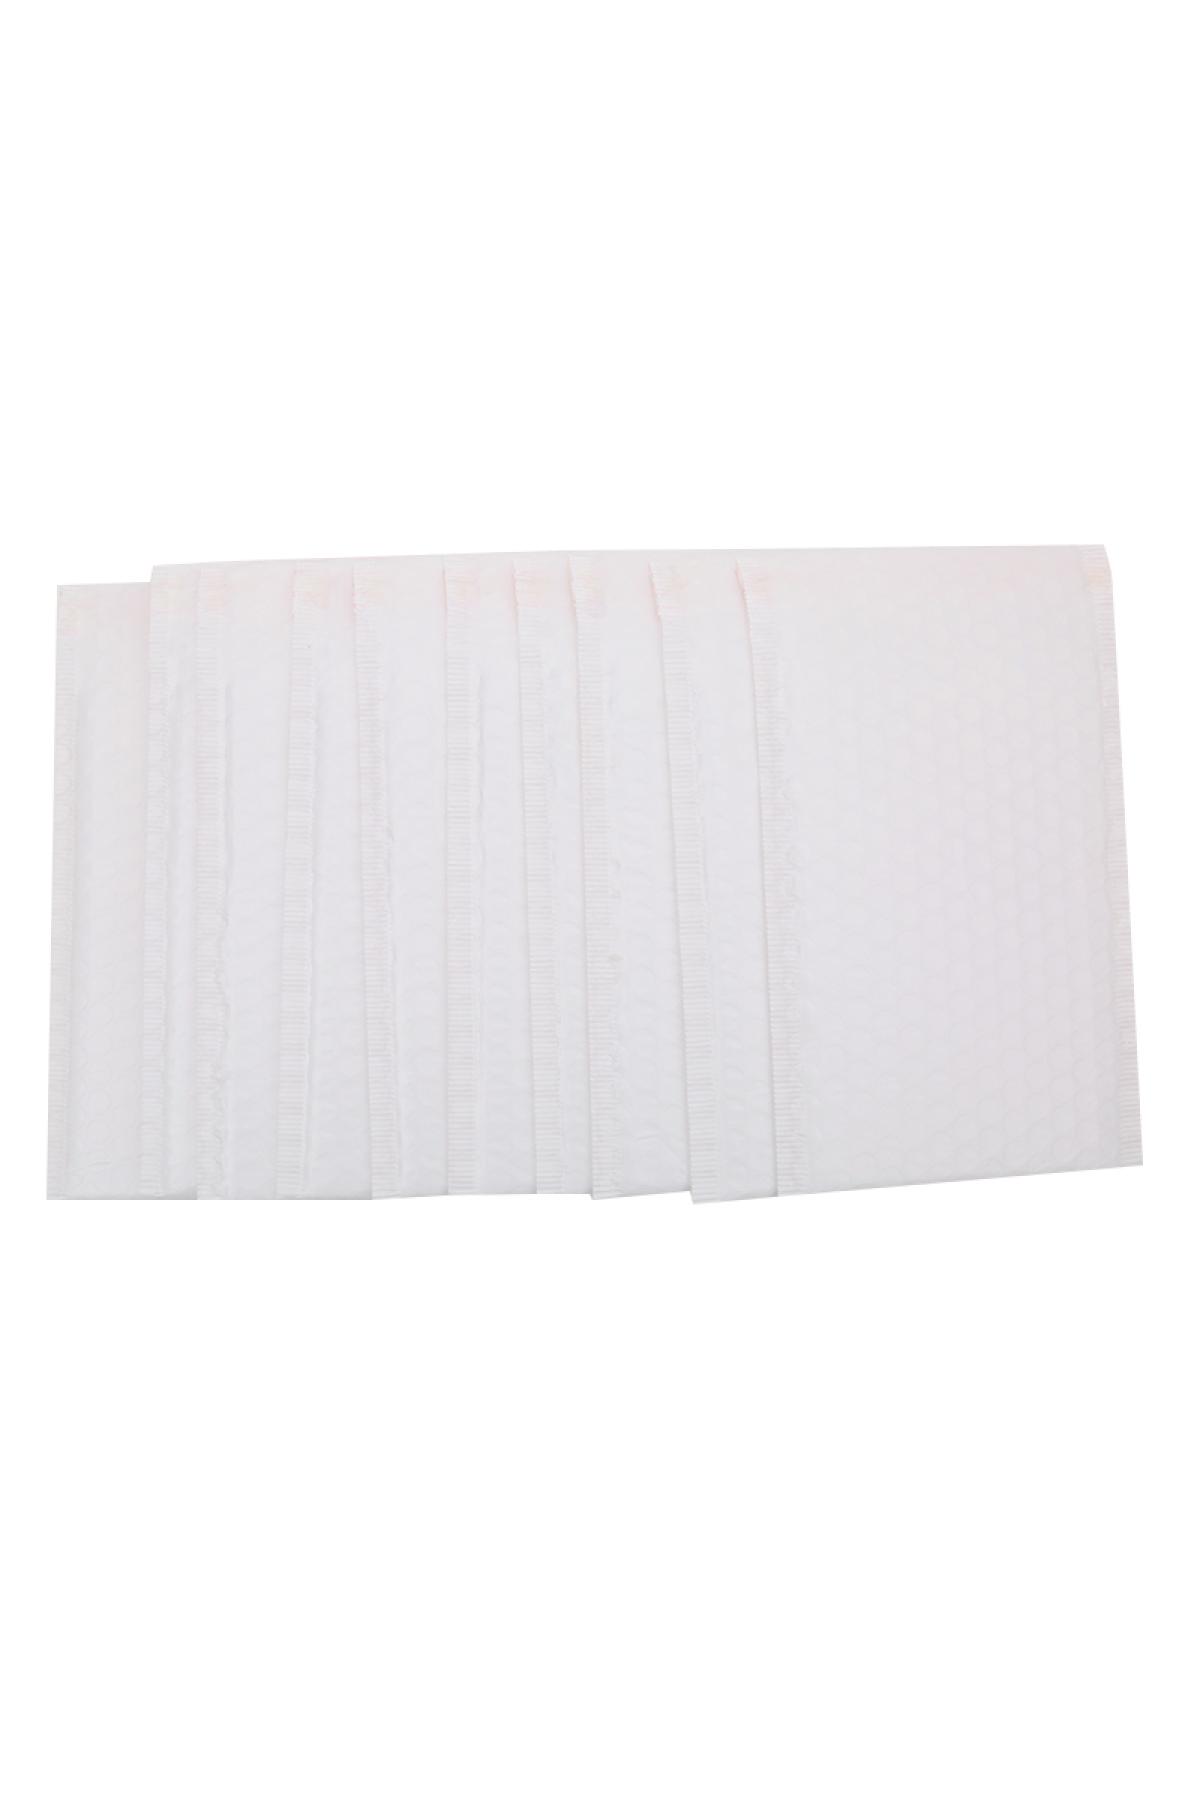 Gift Packaging Party 25x15cm White Plastic h5 